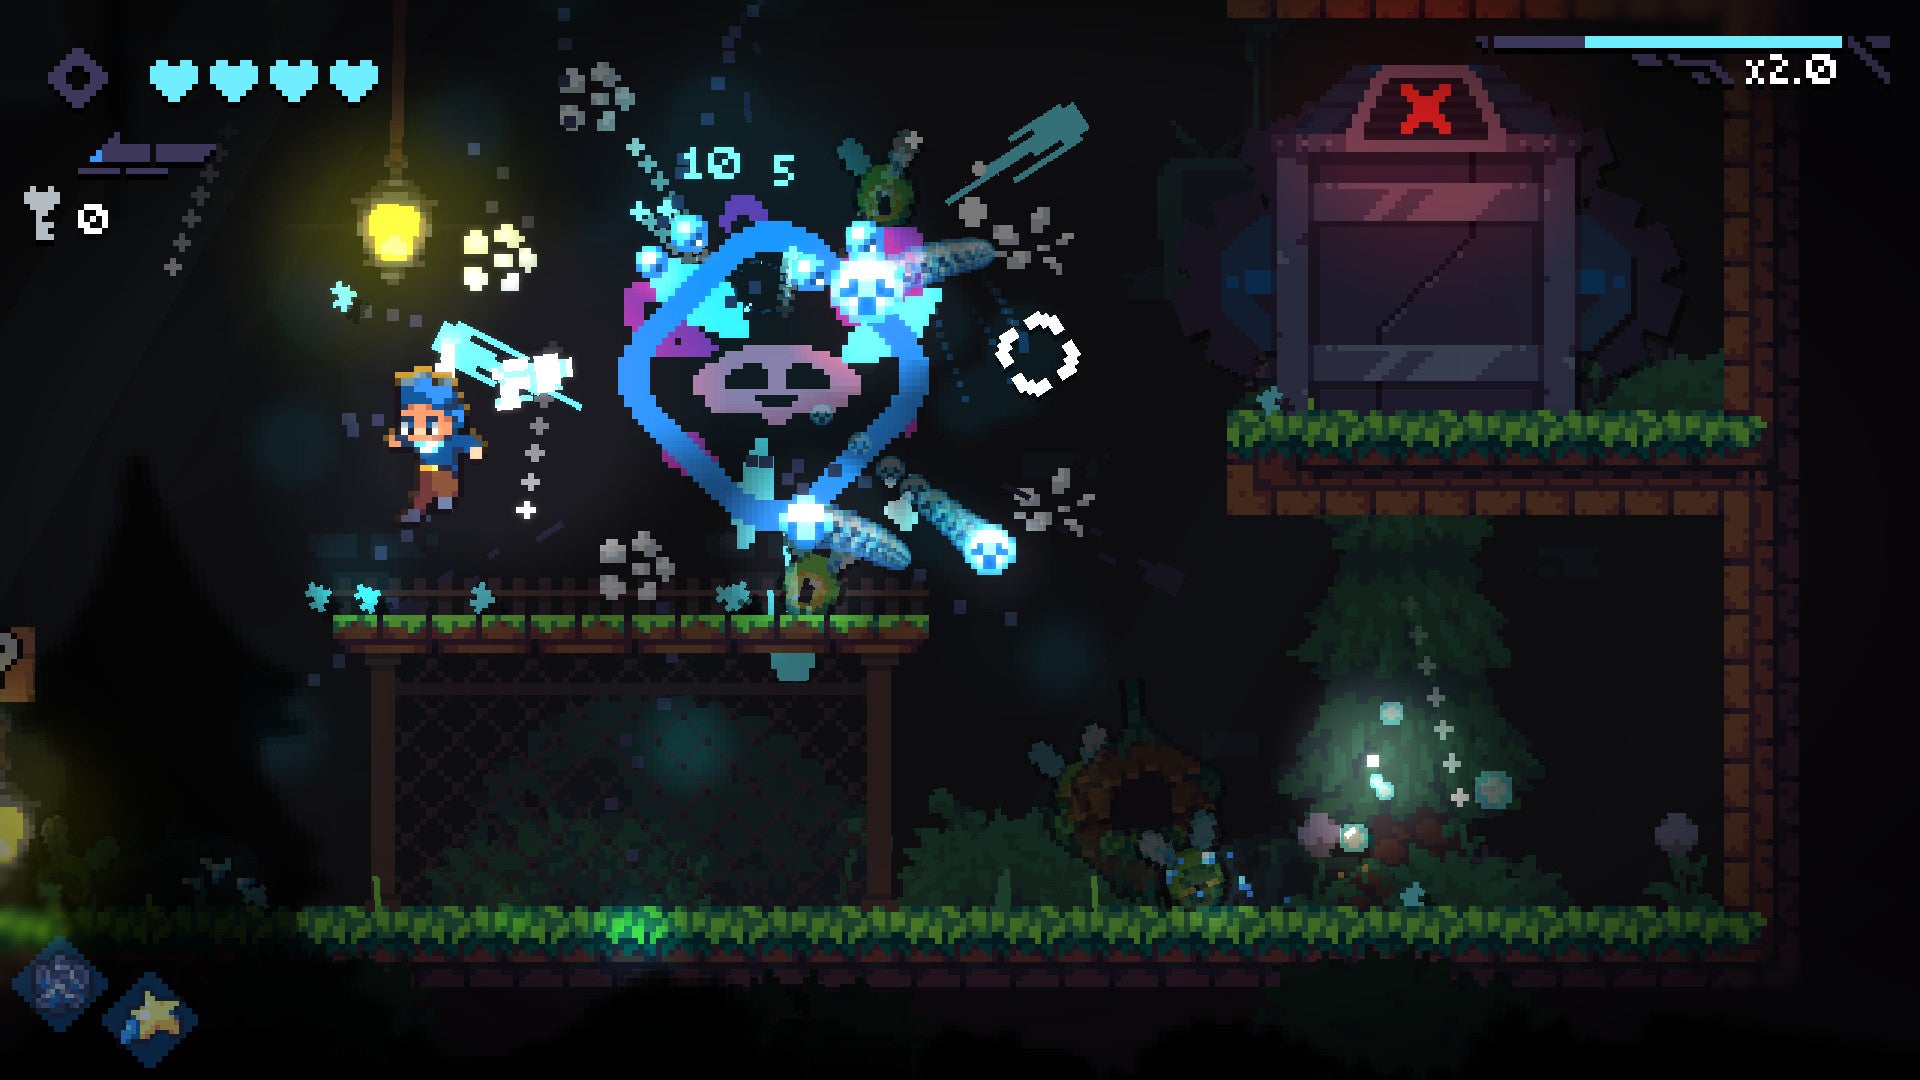 A screenshot of Revita, an action roguelike, showing the character surrounded by various blue glowing status effects and projectiles.